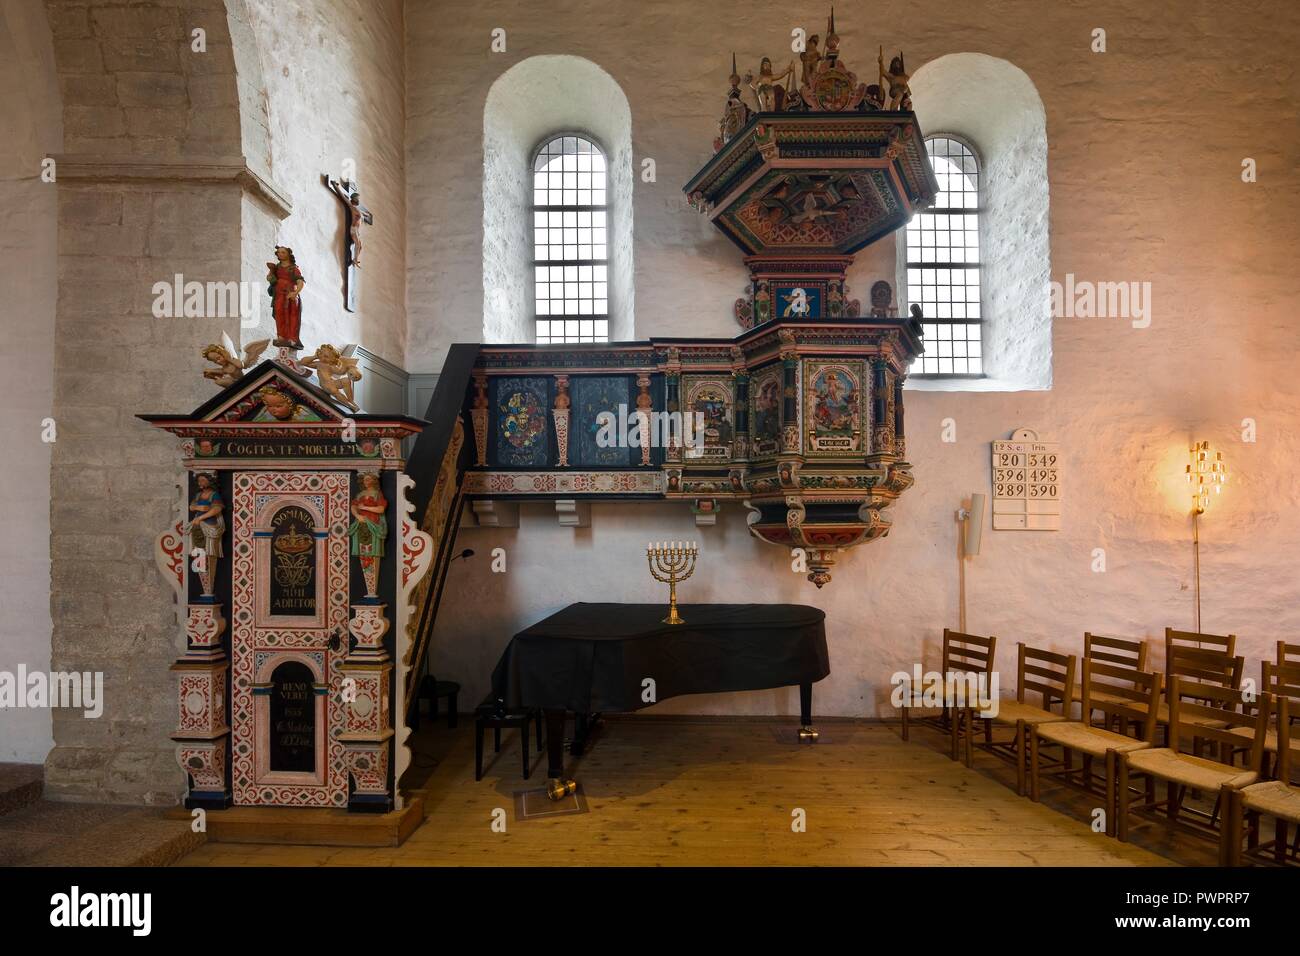 AAKIRKEBY, DENMARK - AUGUST 19, 2018: View of a Renaissance pulpit in Aa church. It is the biggest and oldest church on the Bornholm island. Stock Photo